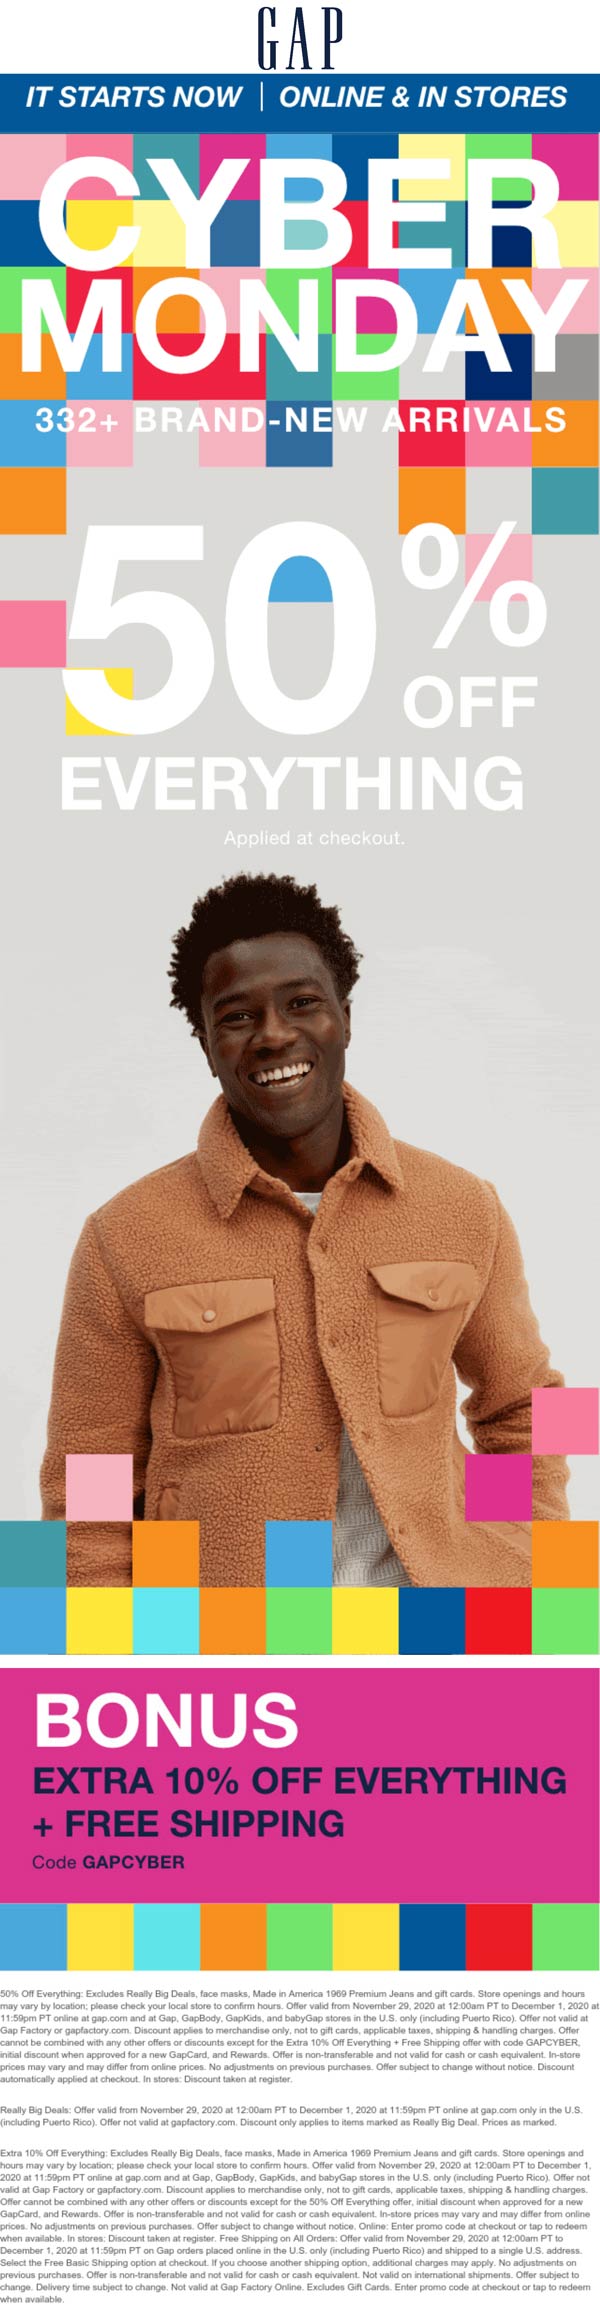 Gap stores Coupon  50% off everything at Gap, or online via promo code GAPCYBER #gap 